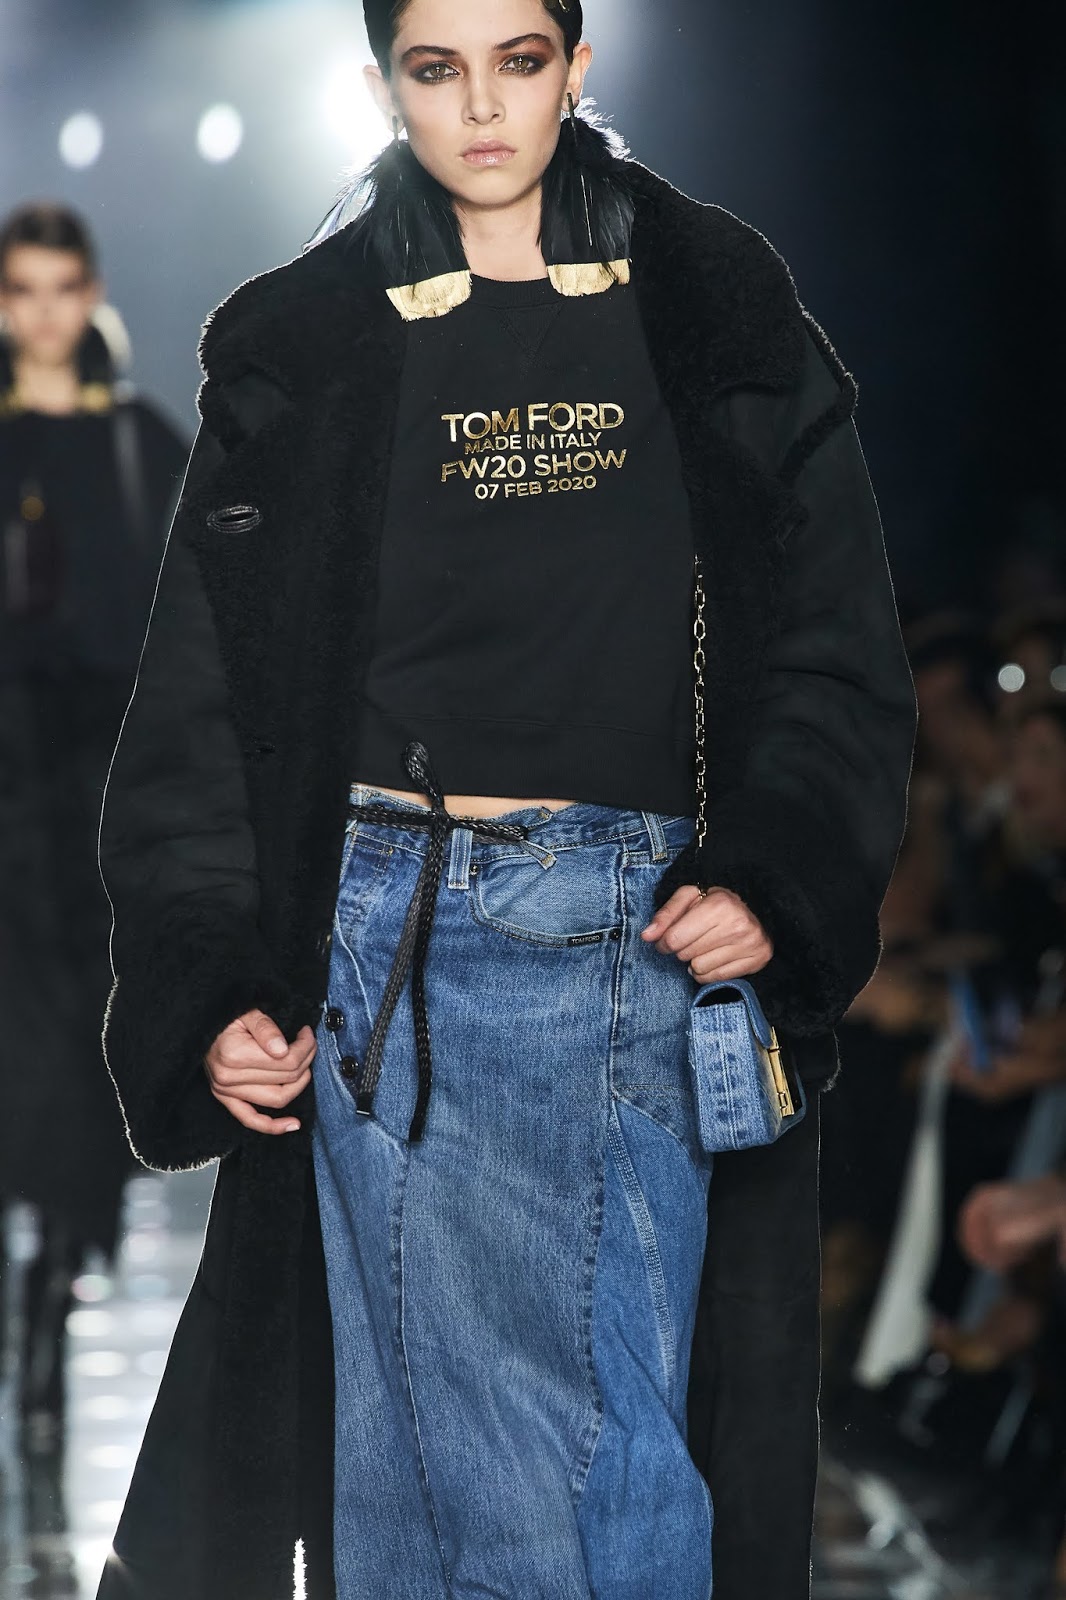 Tom Ford Cool April 12, 2020 | ZsaZsa Bellagio - Like No Other